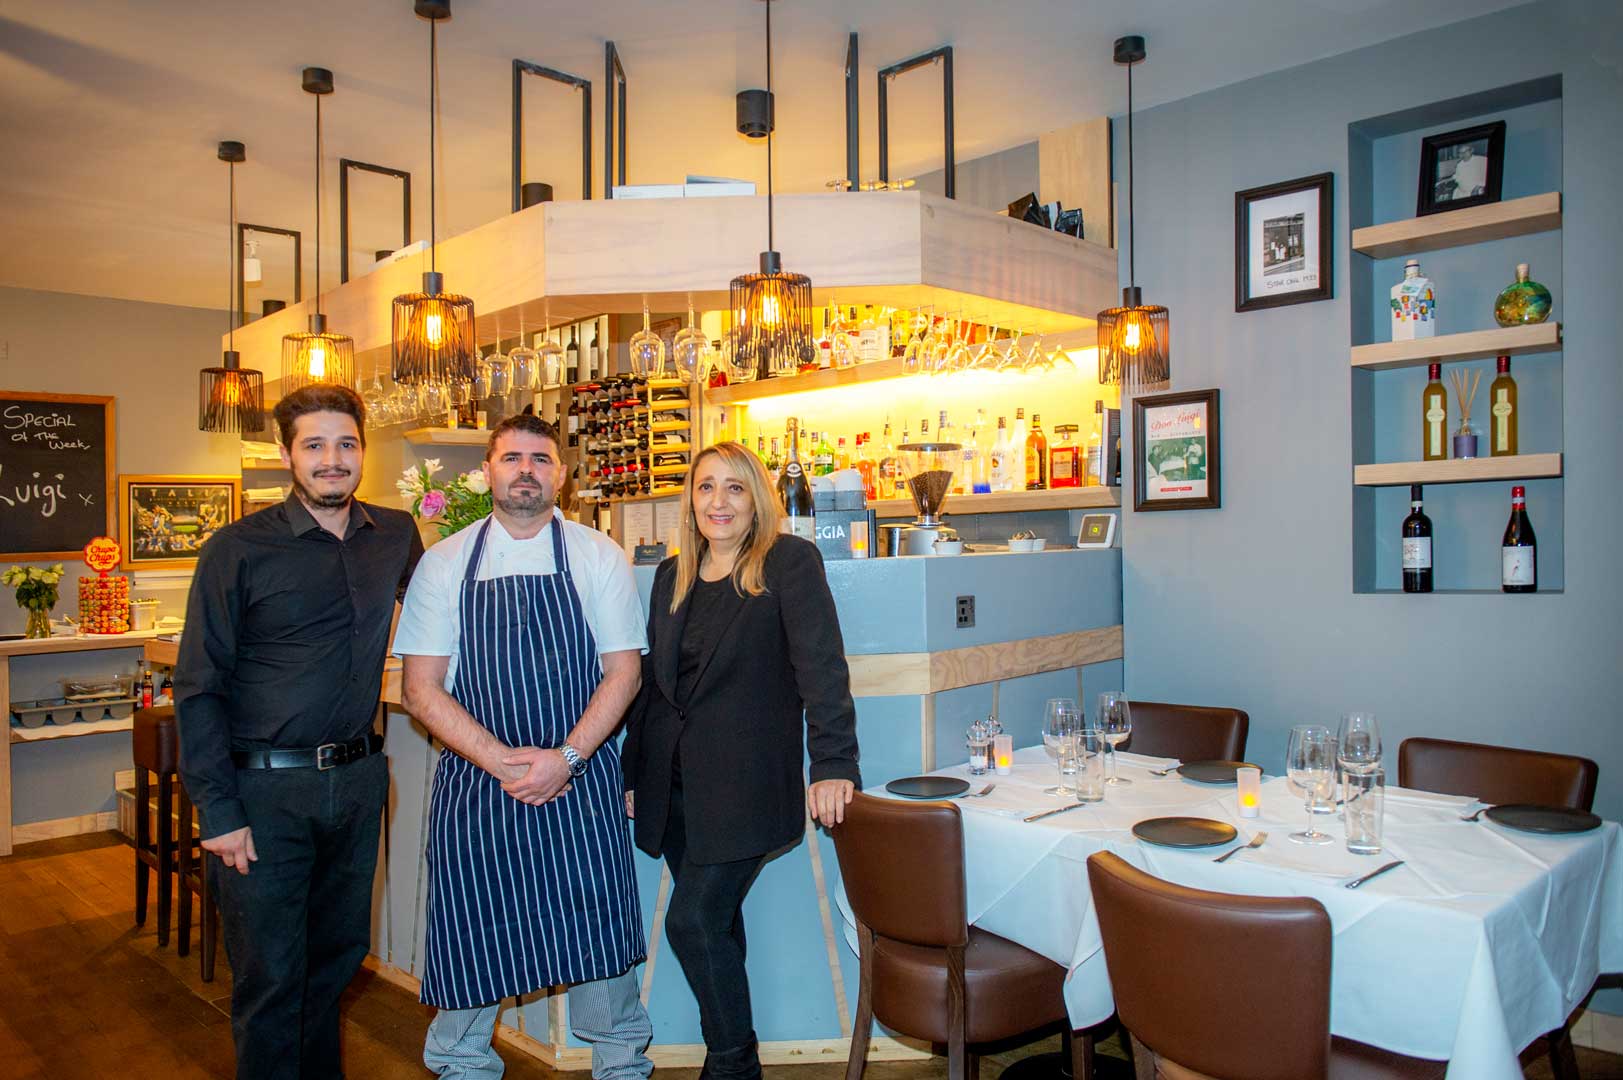 Fulham Restaurant: Raffaele’s – Going Back To Their Roots